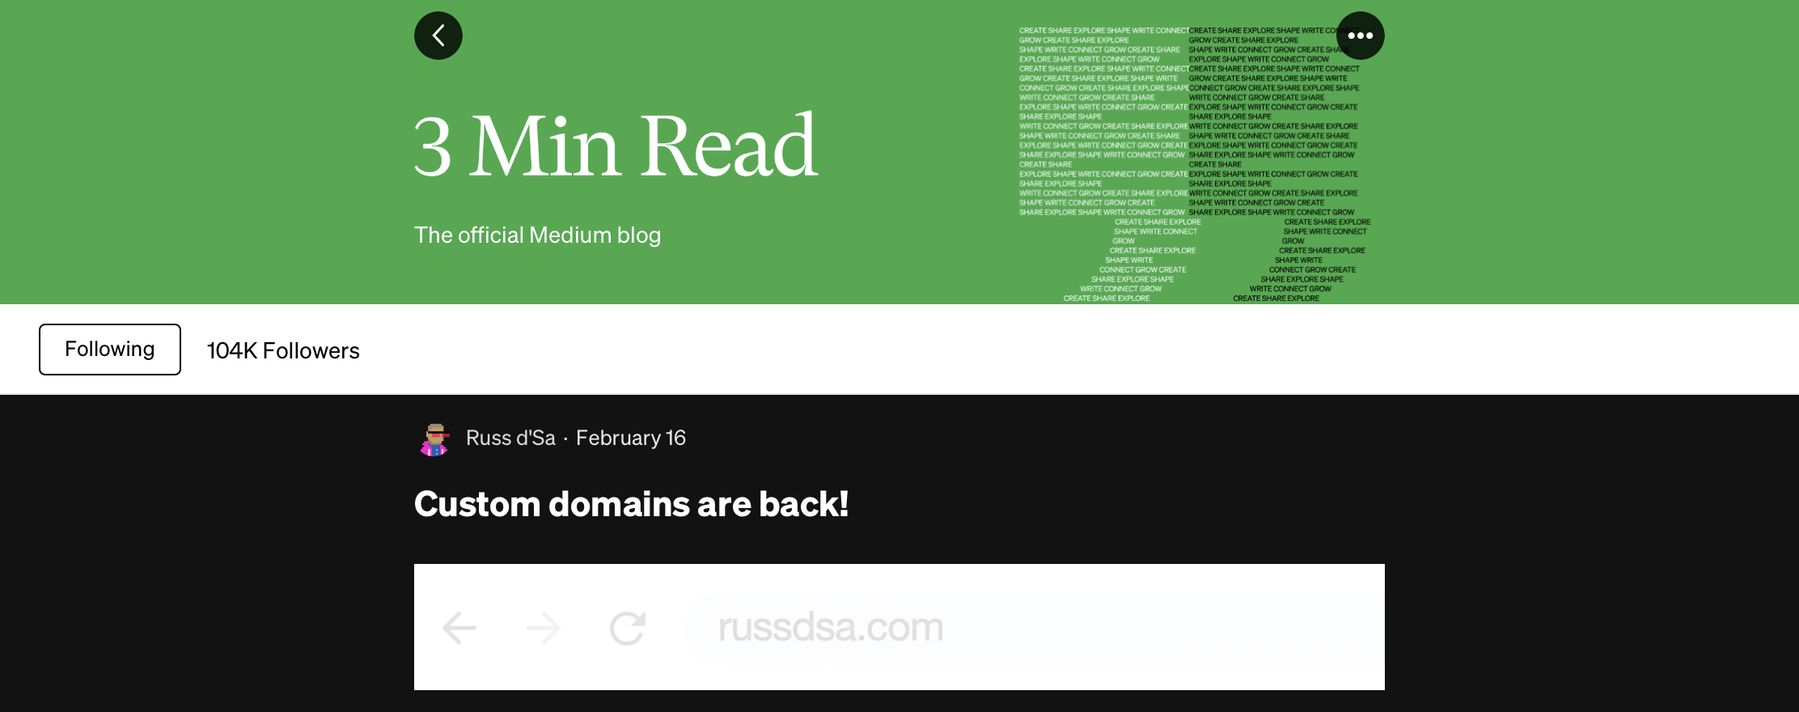 The official Medium blog announcing renewed custom domain support.